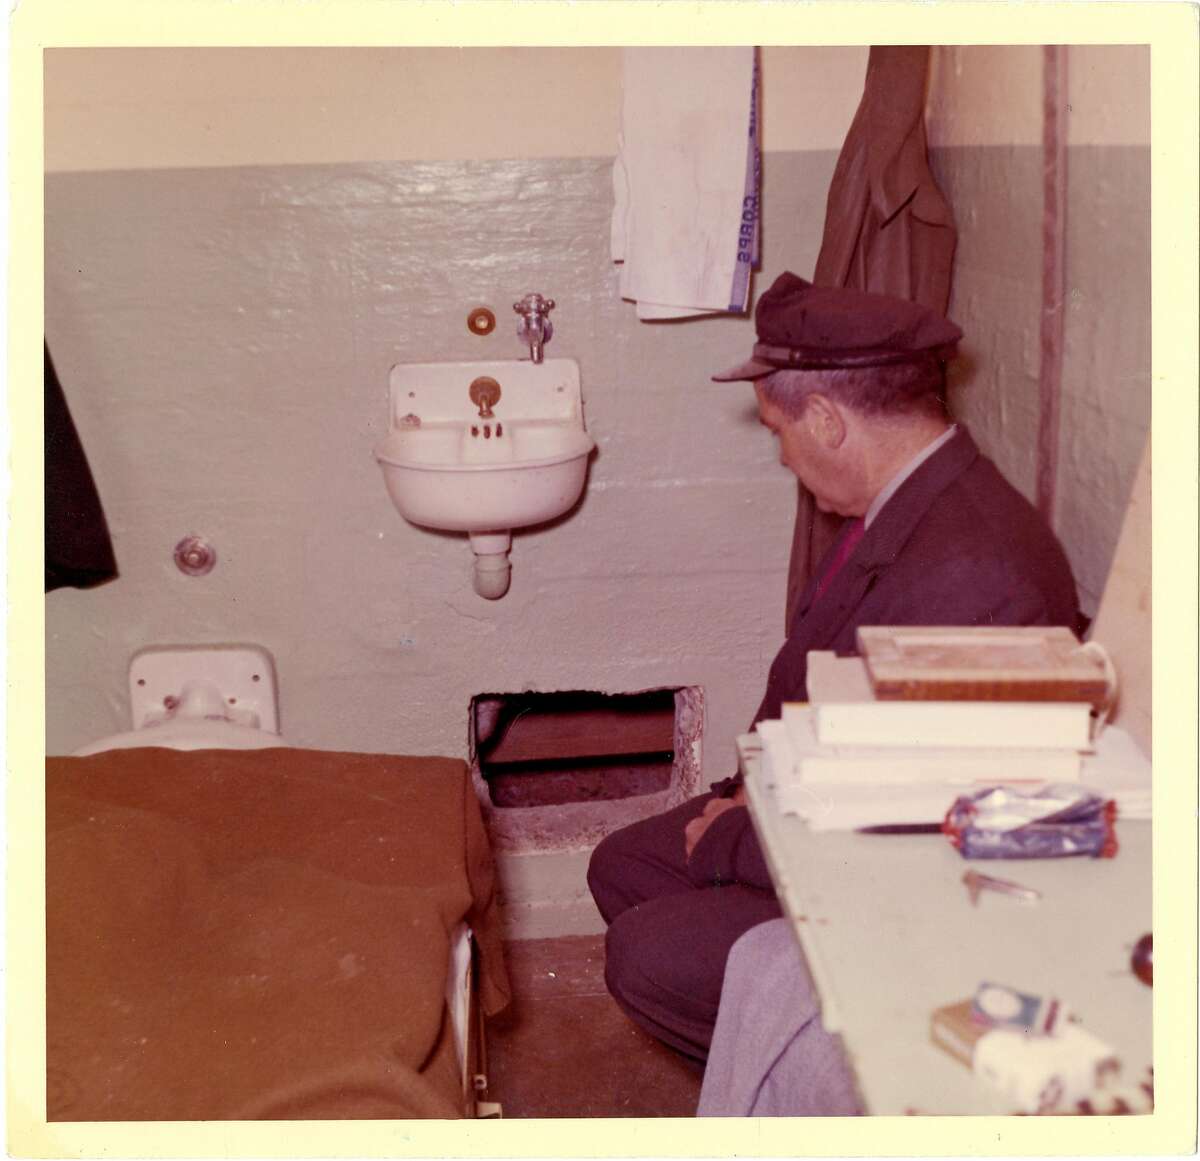 This 1962 photo from the U.S. Penitentiary Alcatraz shows Frank Morris's cell and Senior Officer Howard Waldron looking at the point of escape. Monday, June 11th marks the 50th anniversary of the escape of three prisoners from U.S. Penitentiary Alcatraz in San Francisco, Calif. The U.S. Marshals Service to this day continues to have an open case on the escape.